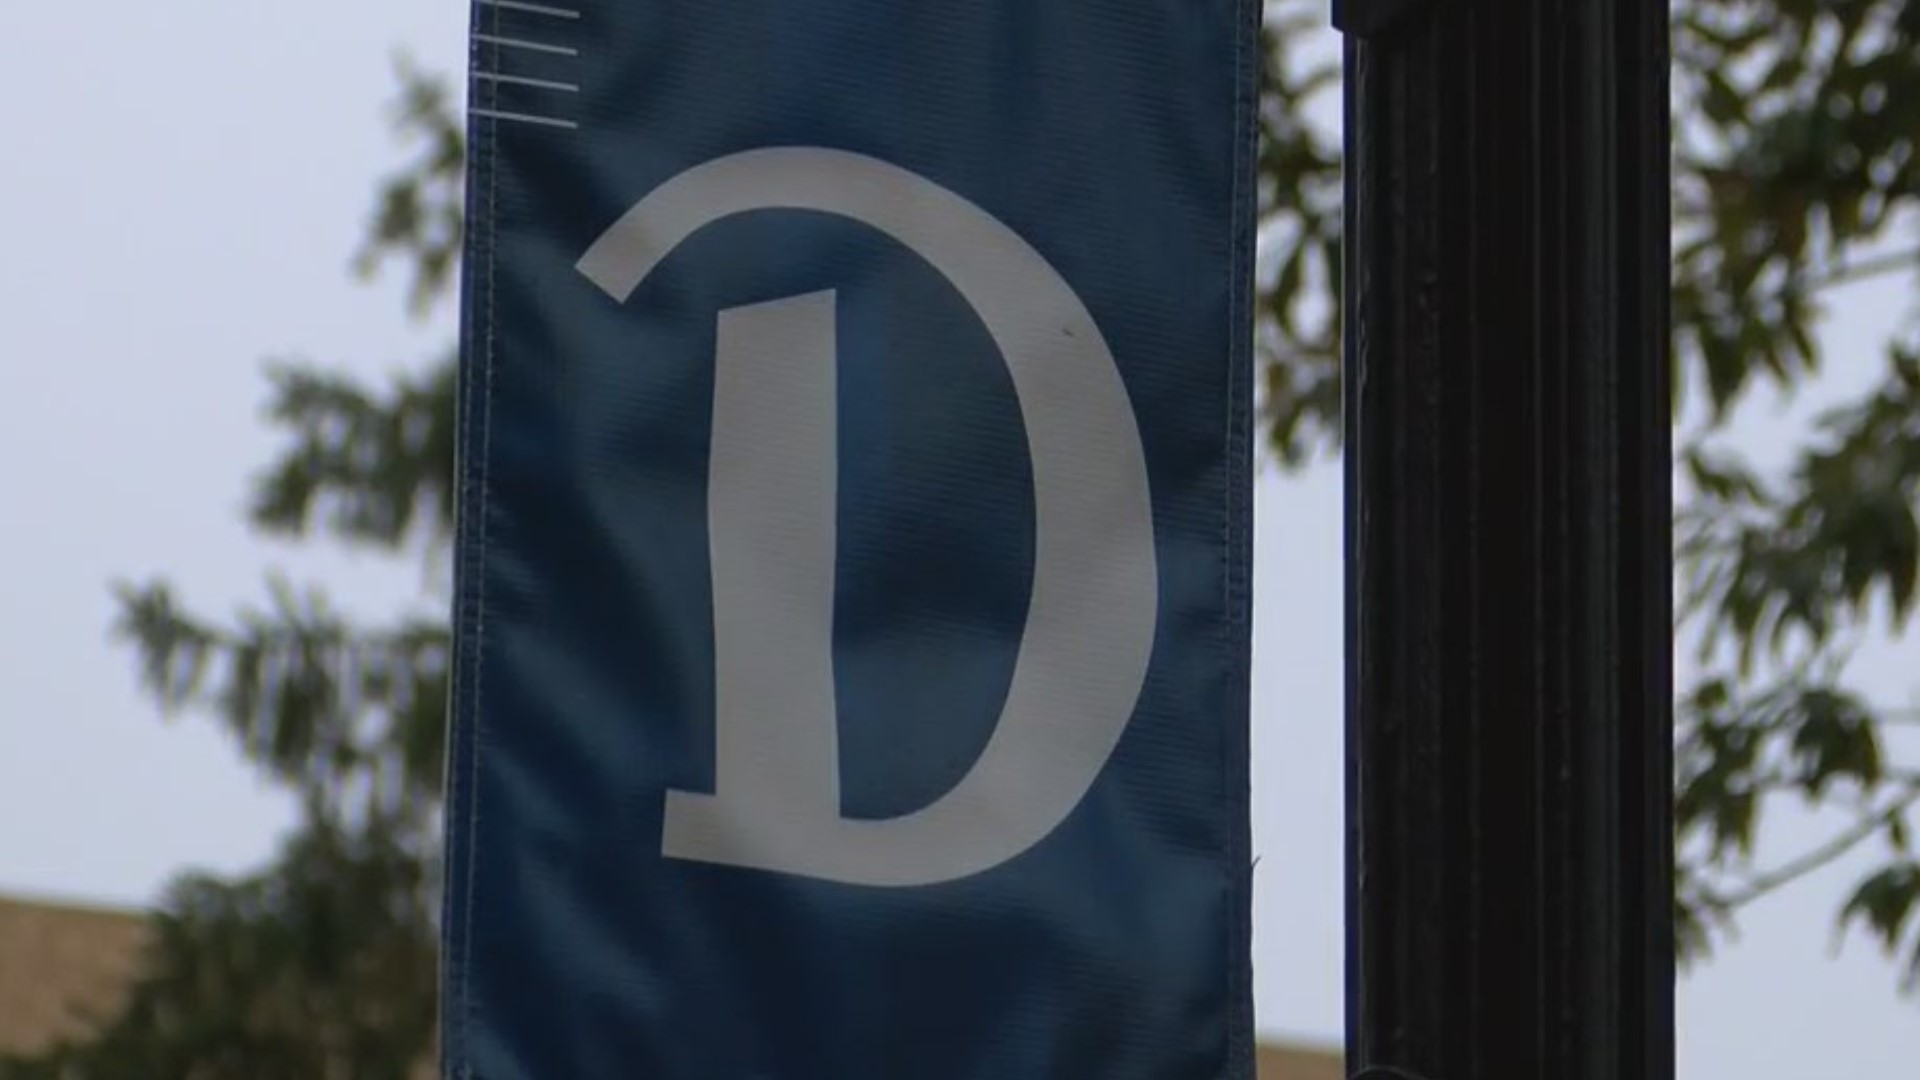 Following a Faculty Senate meeting on Thursday night, Drake University President Marty Martin and the Board of Trustees are set to announce their decision April 29.